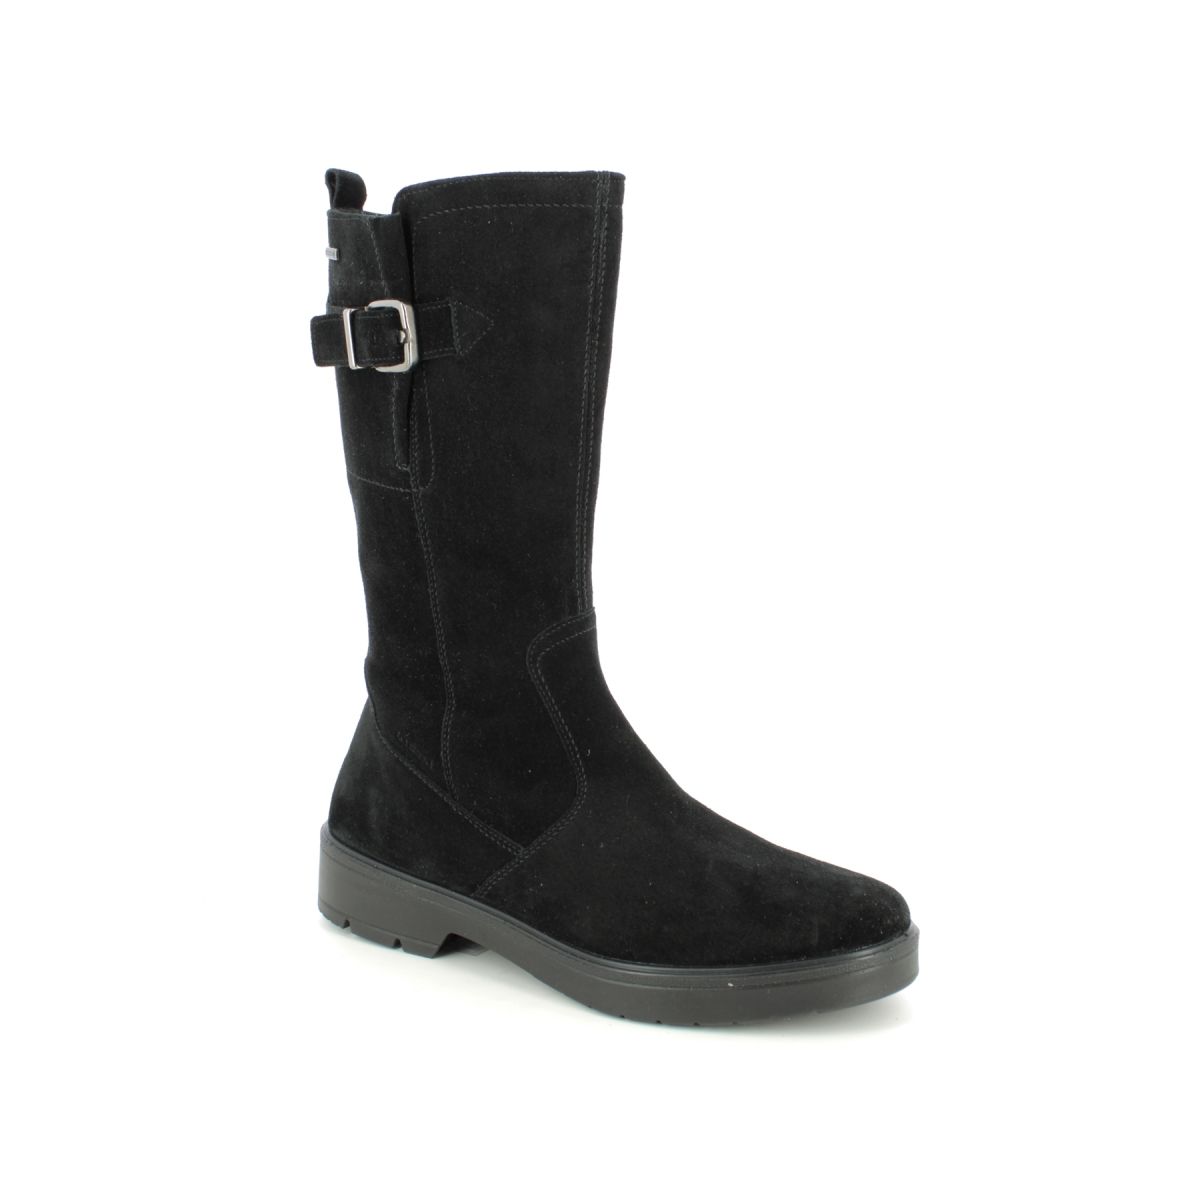 Legero Mystic Mid Gtx Black Suede Womens Mid Calf Boots 2000196-0000 in a Plain Leather in Size 7.5